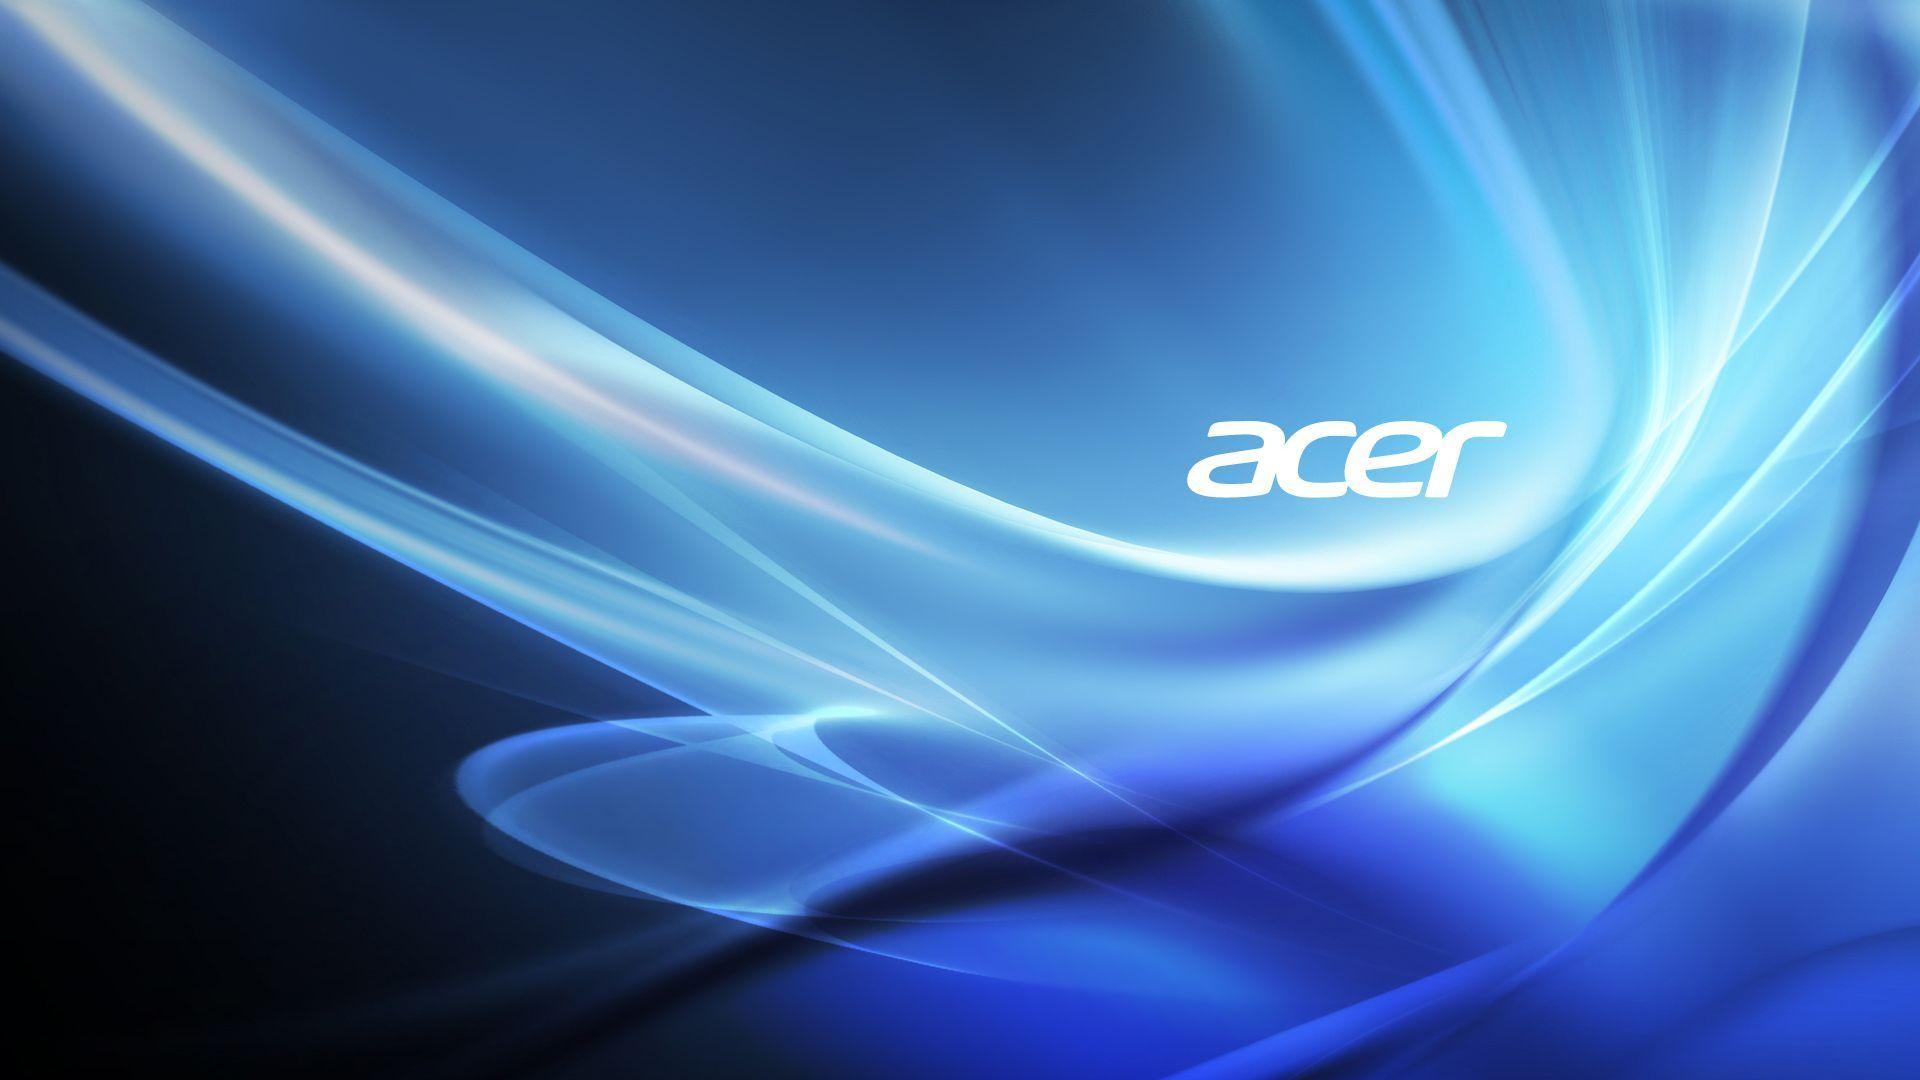 Acer Wallpapers - Wallpaper Cave Full Hd Wallpapers For Windows 8 1920x1080